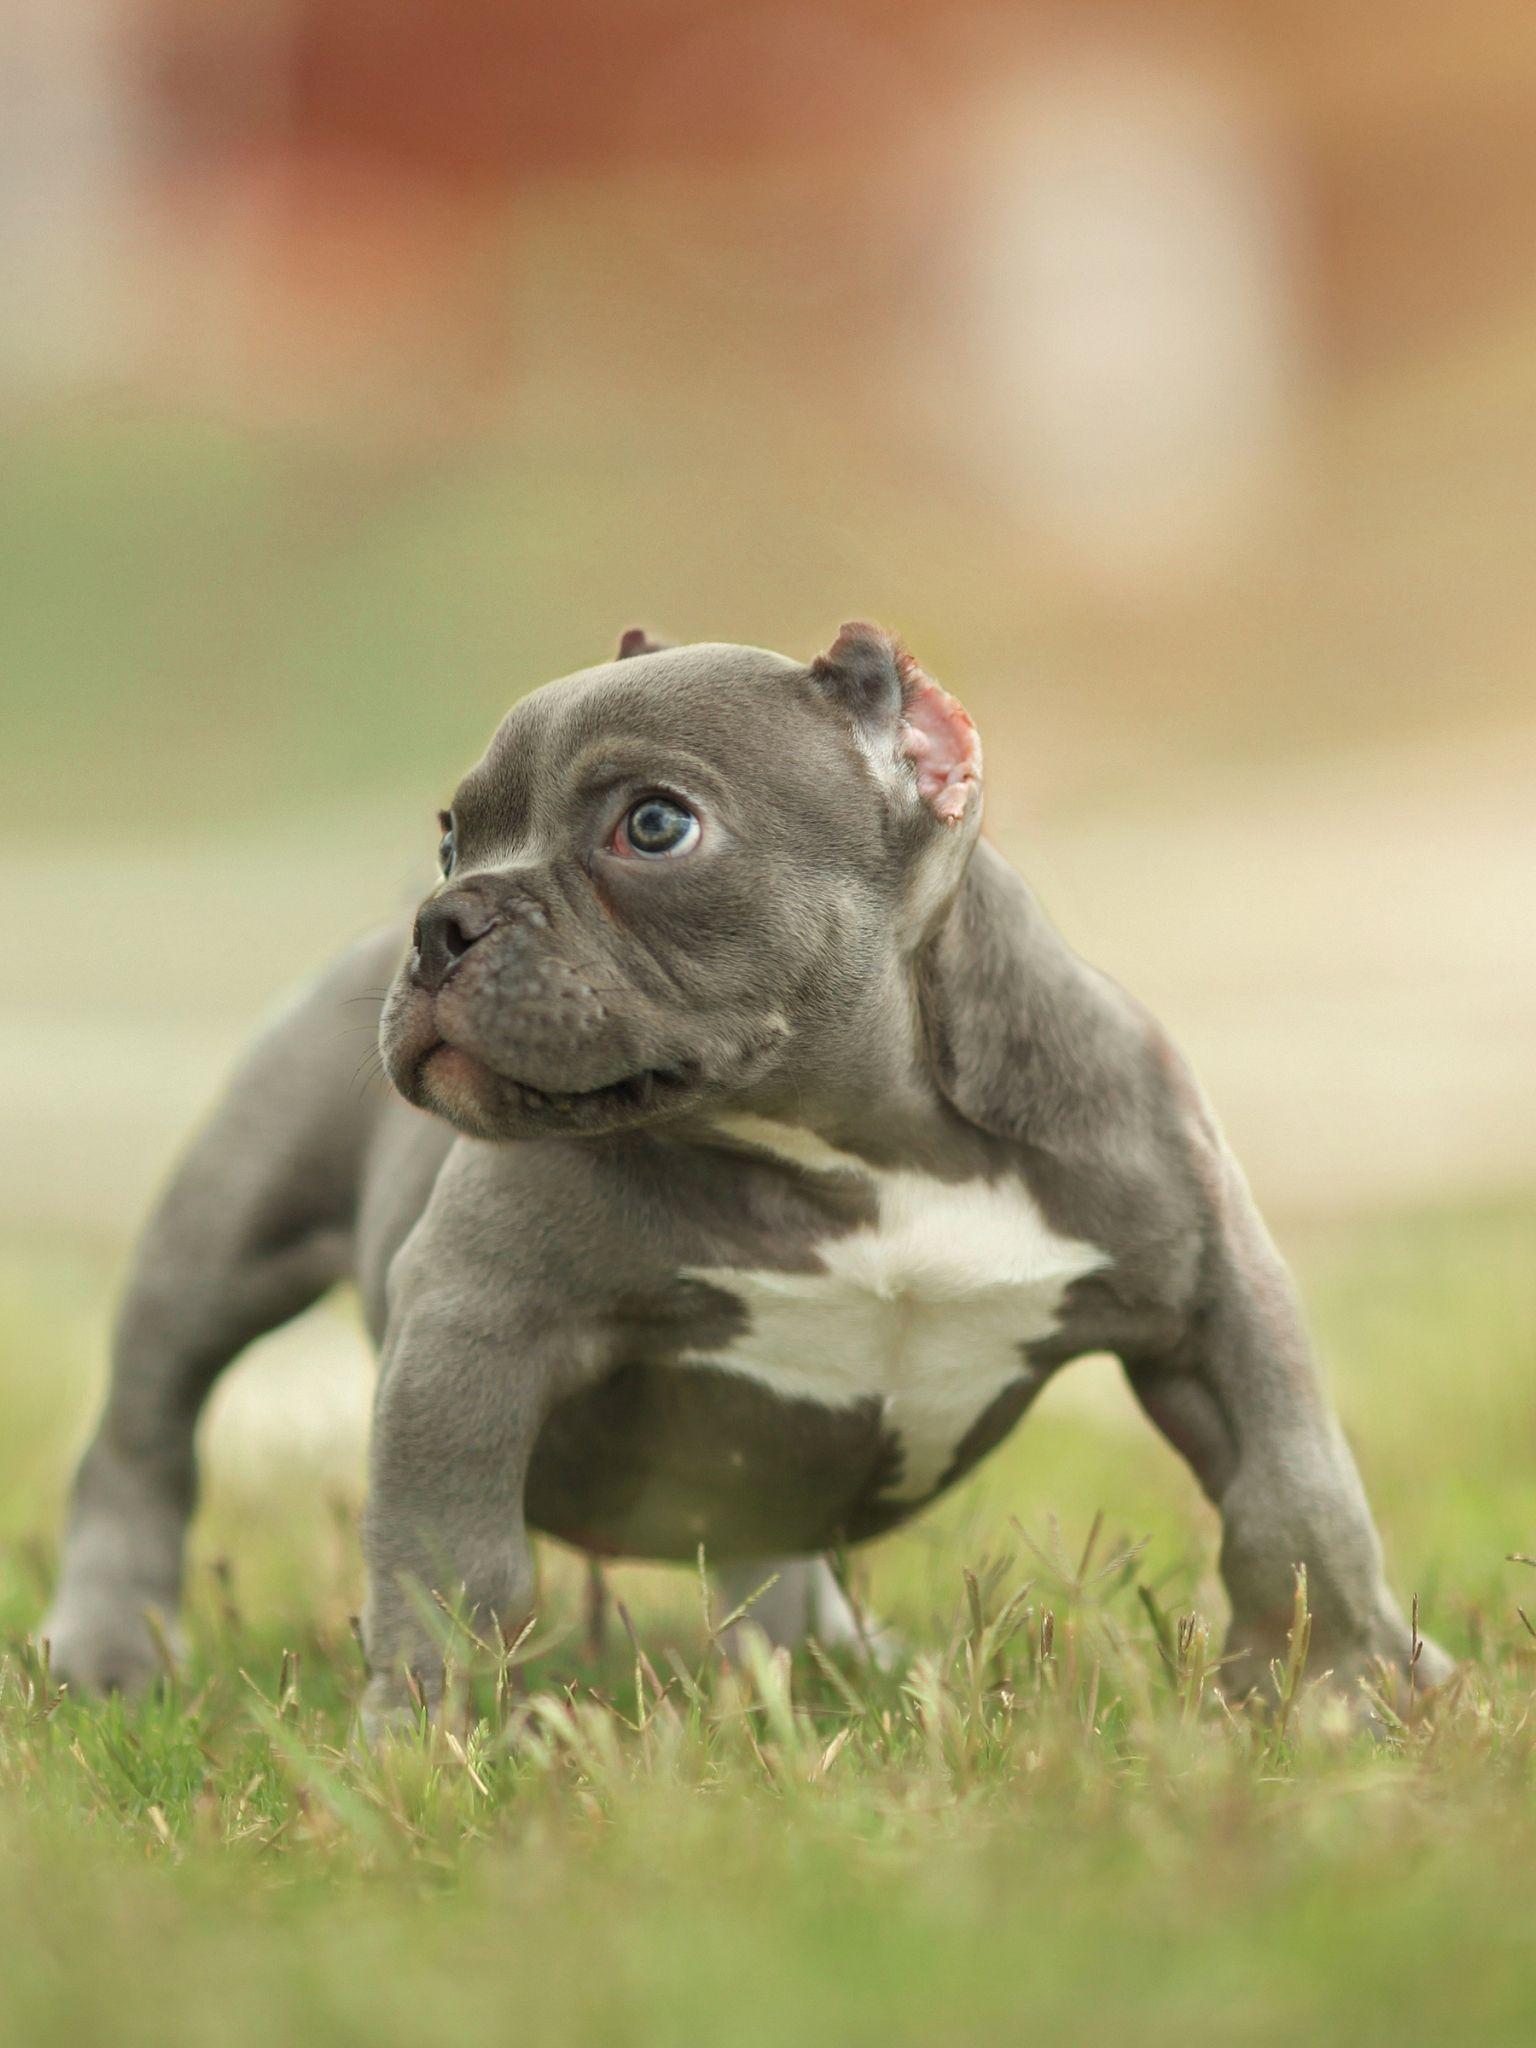 American Bully Wallpapers - Top Free American Bully Backgrounds